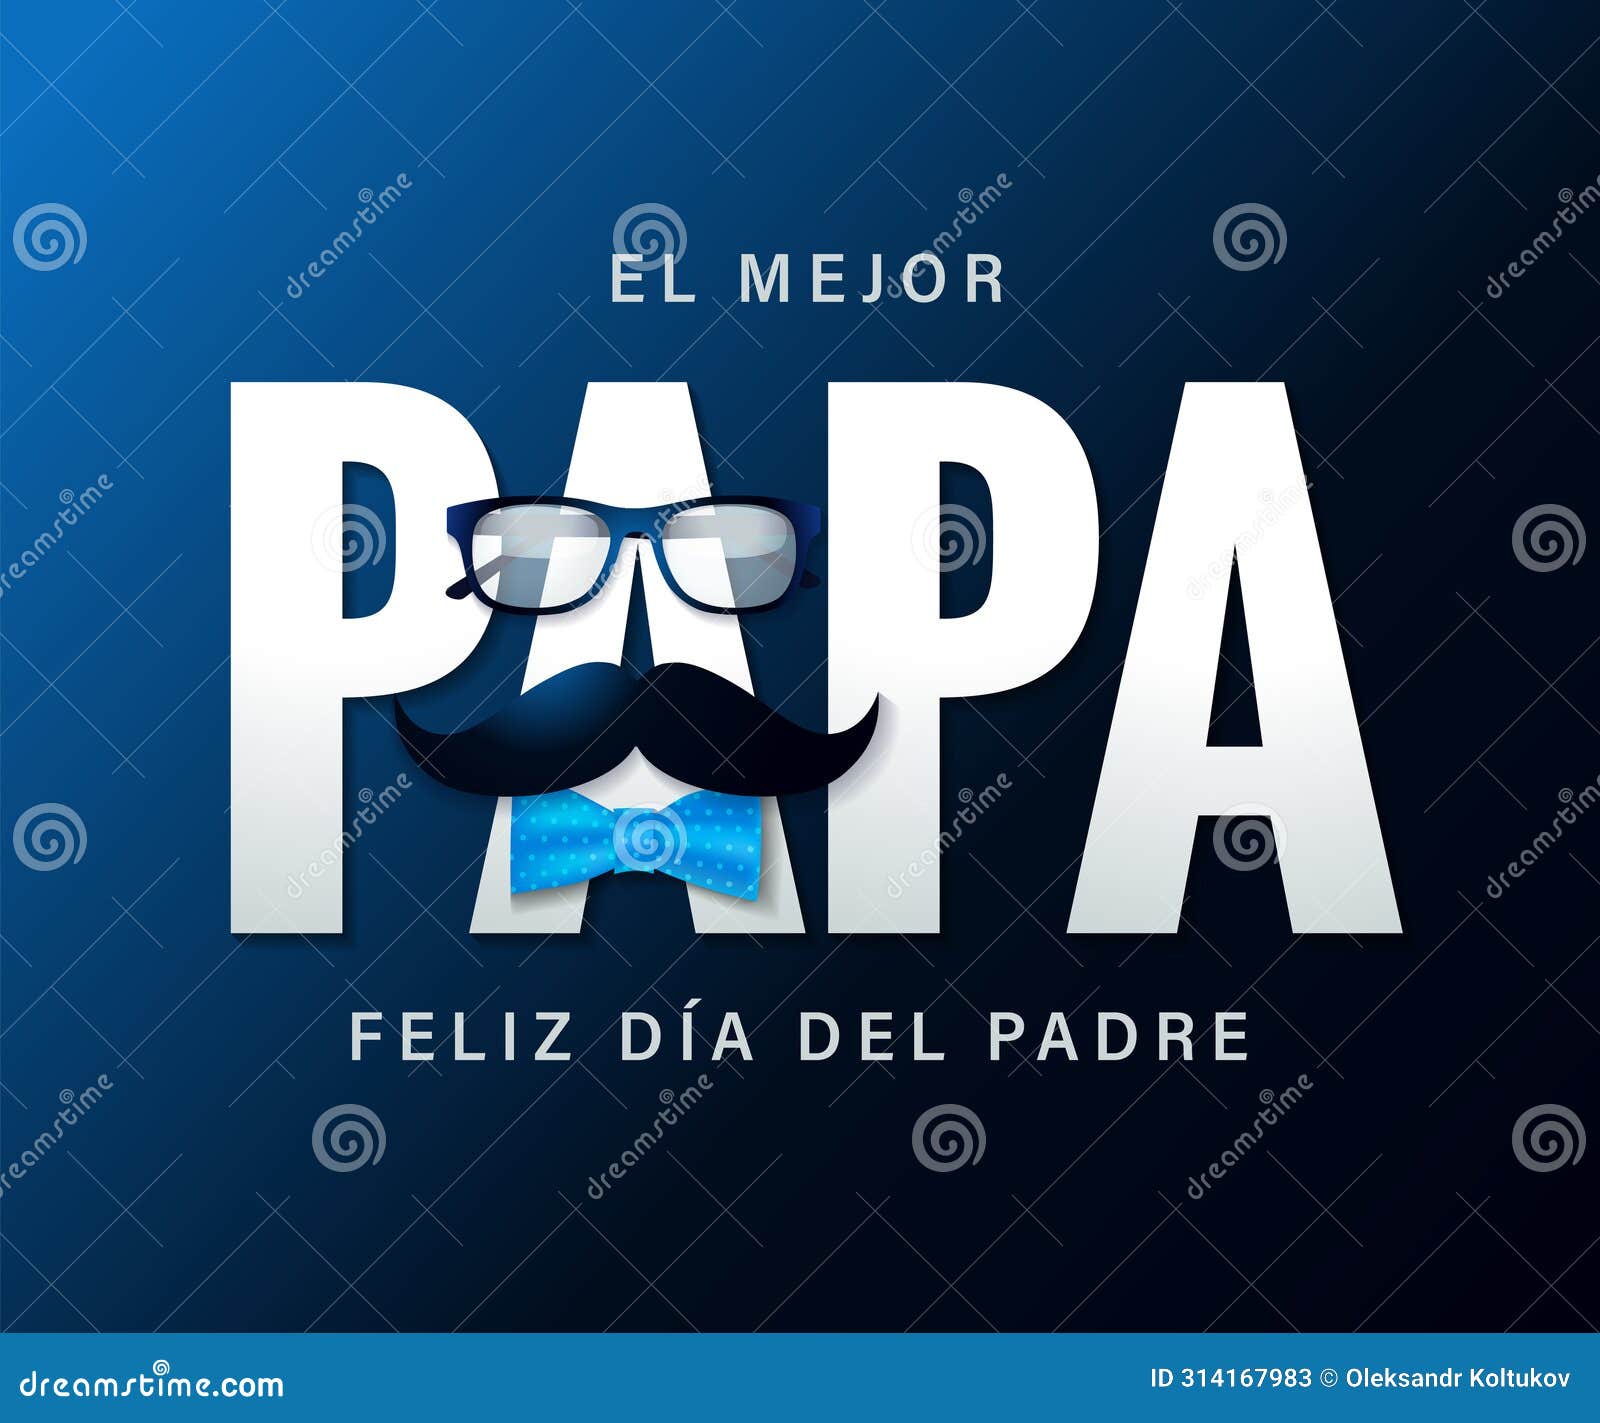 el mejor papa, happy fathers day spanish banner with glasses mustache and bow tie